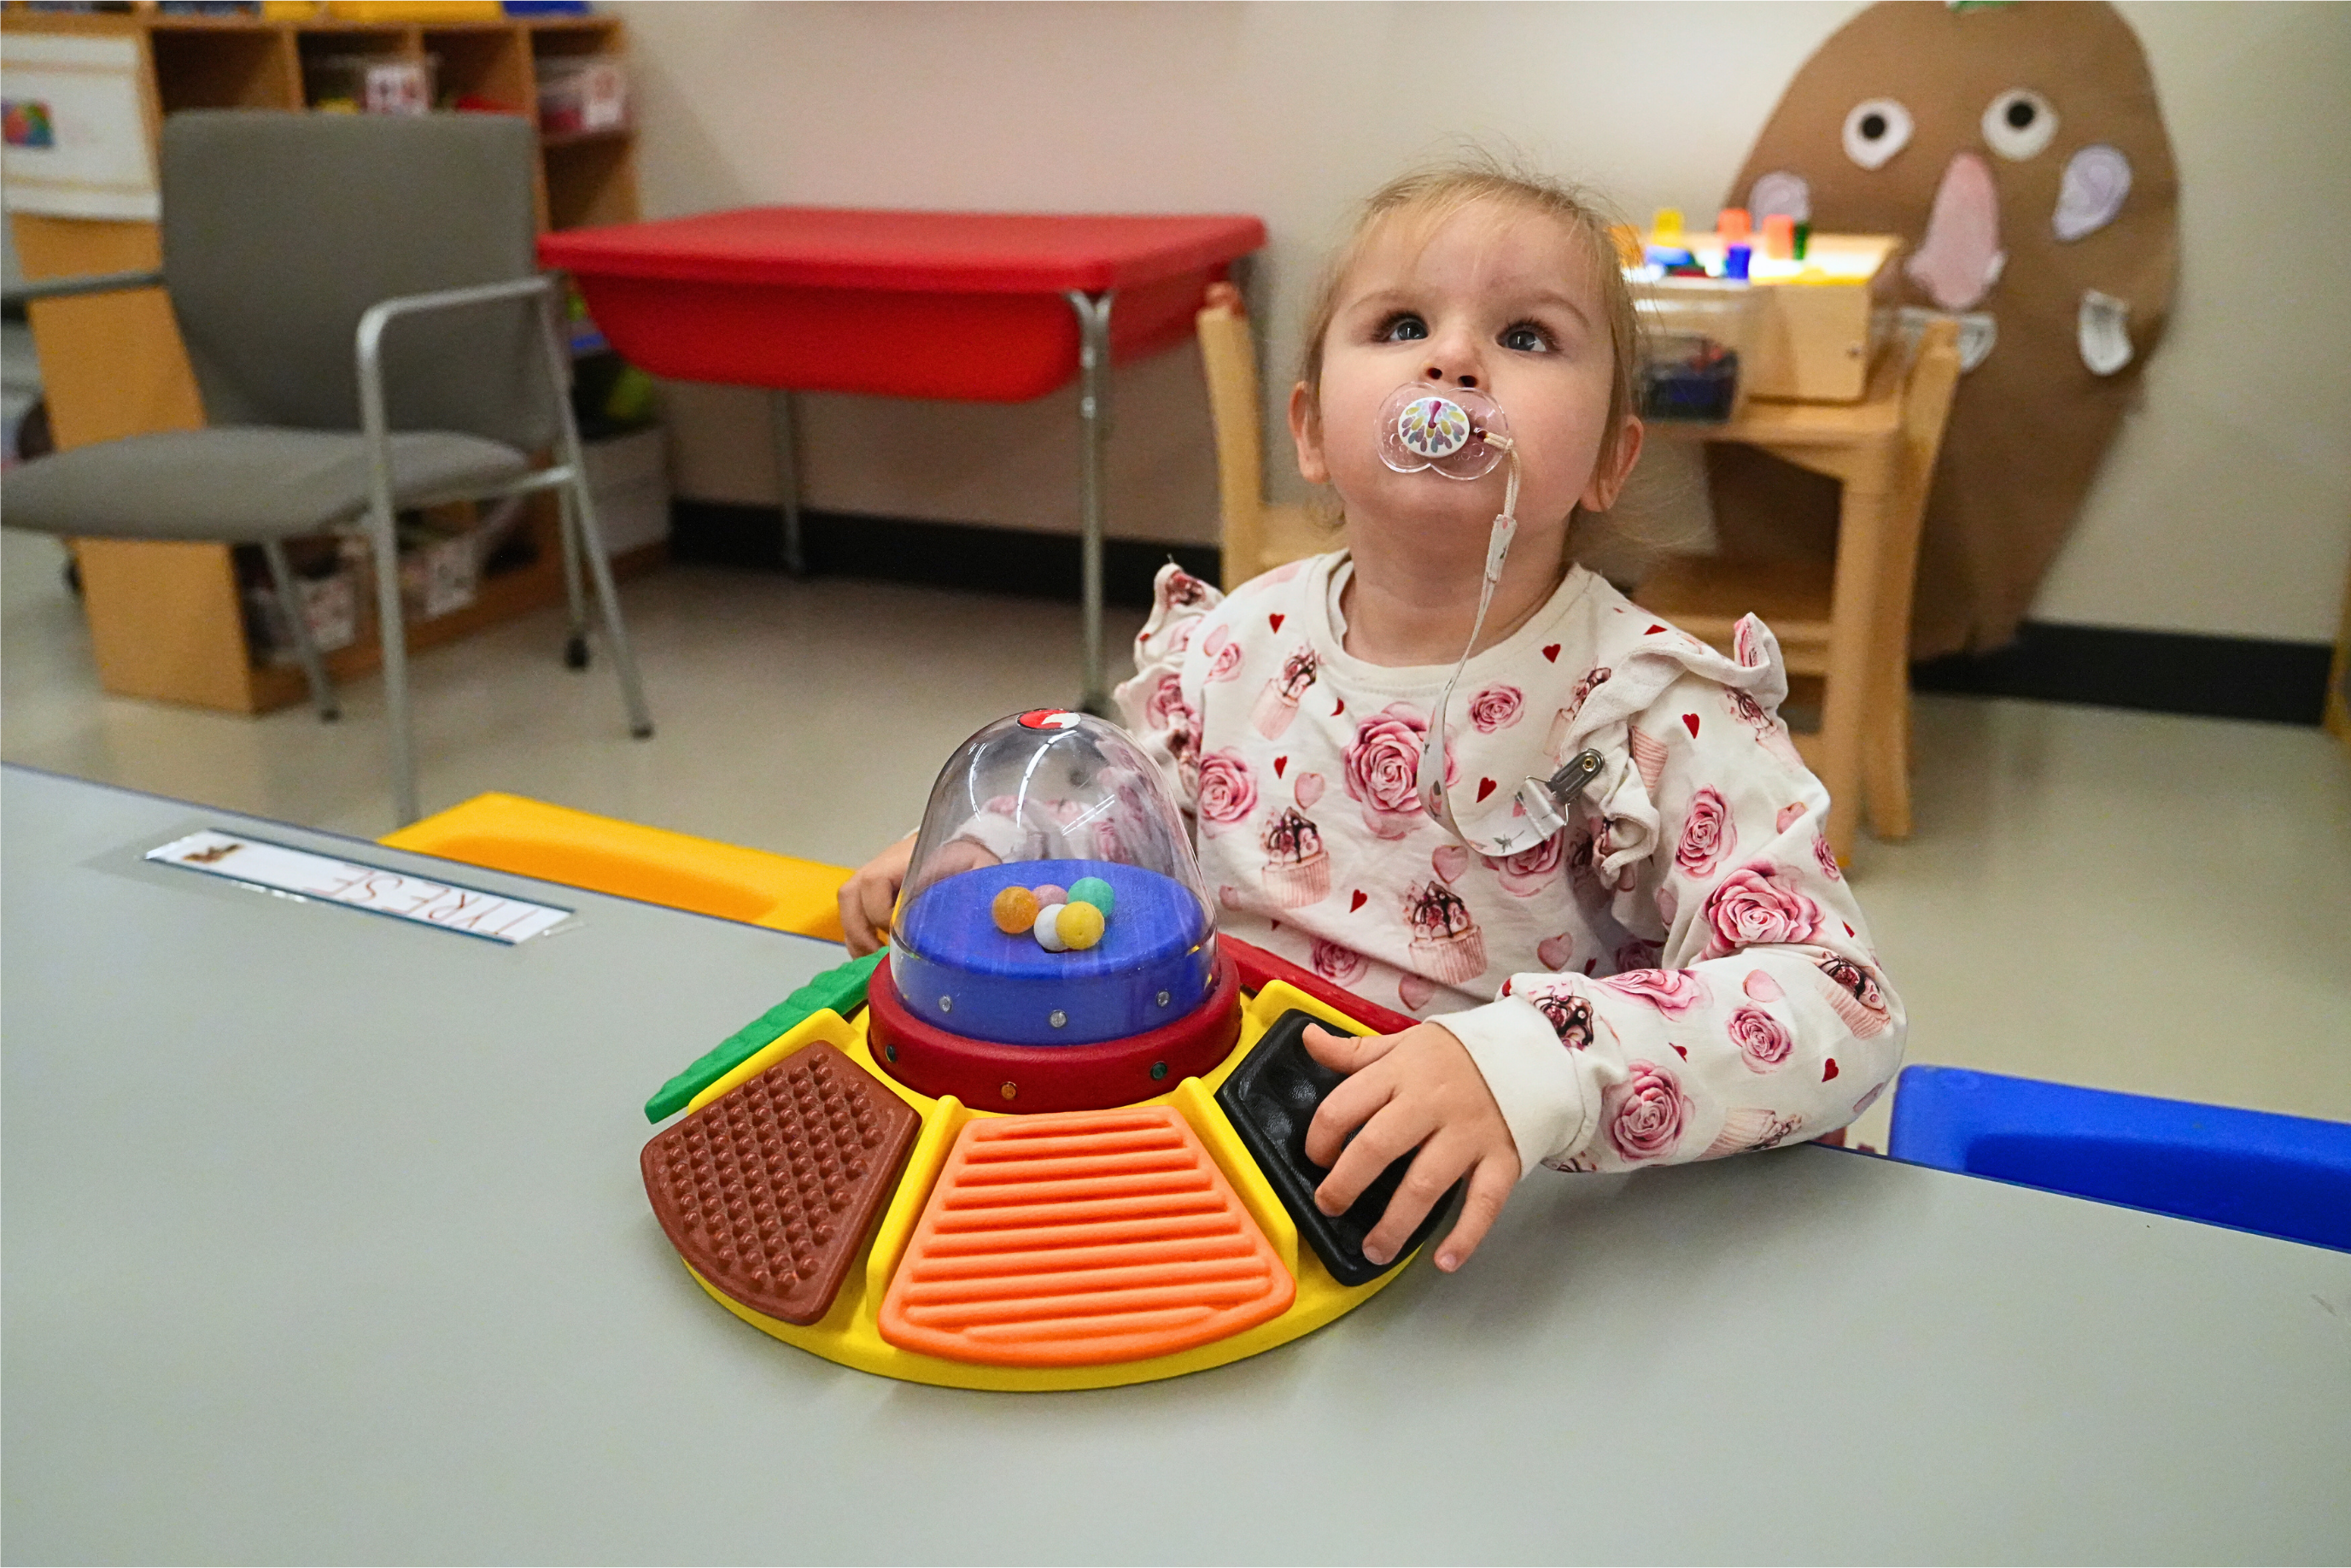 A preschool girl plays with a sensory toy in a Children's Learning Center classroom.